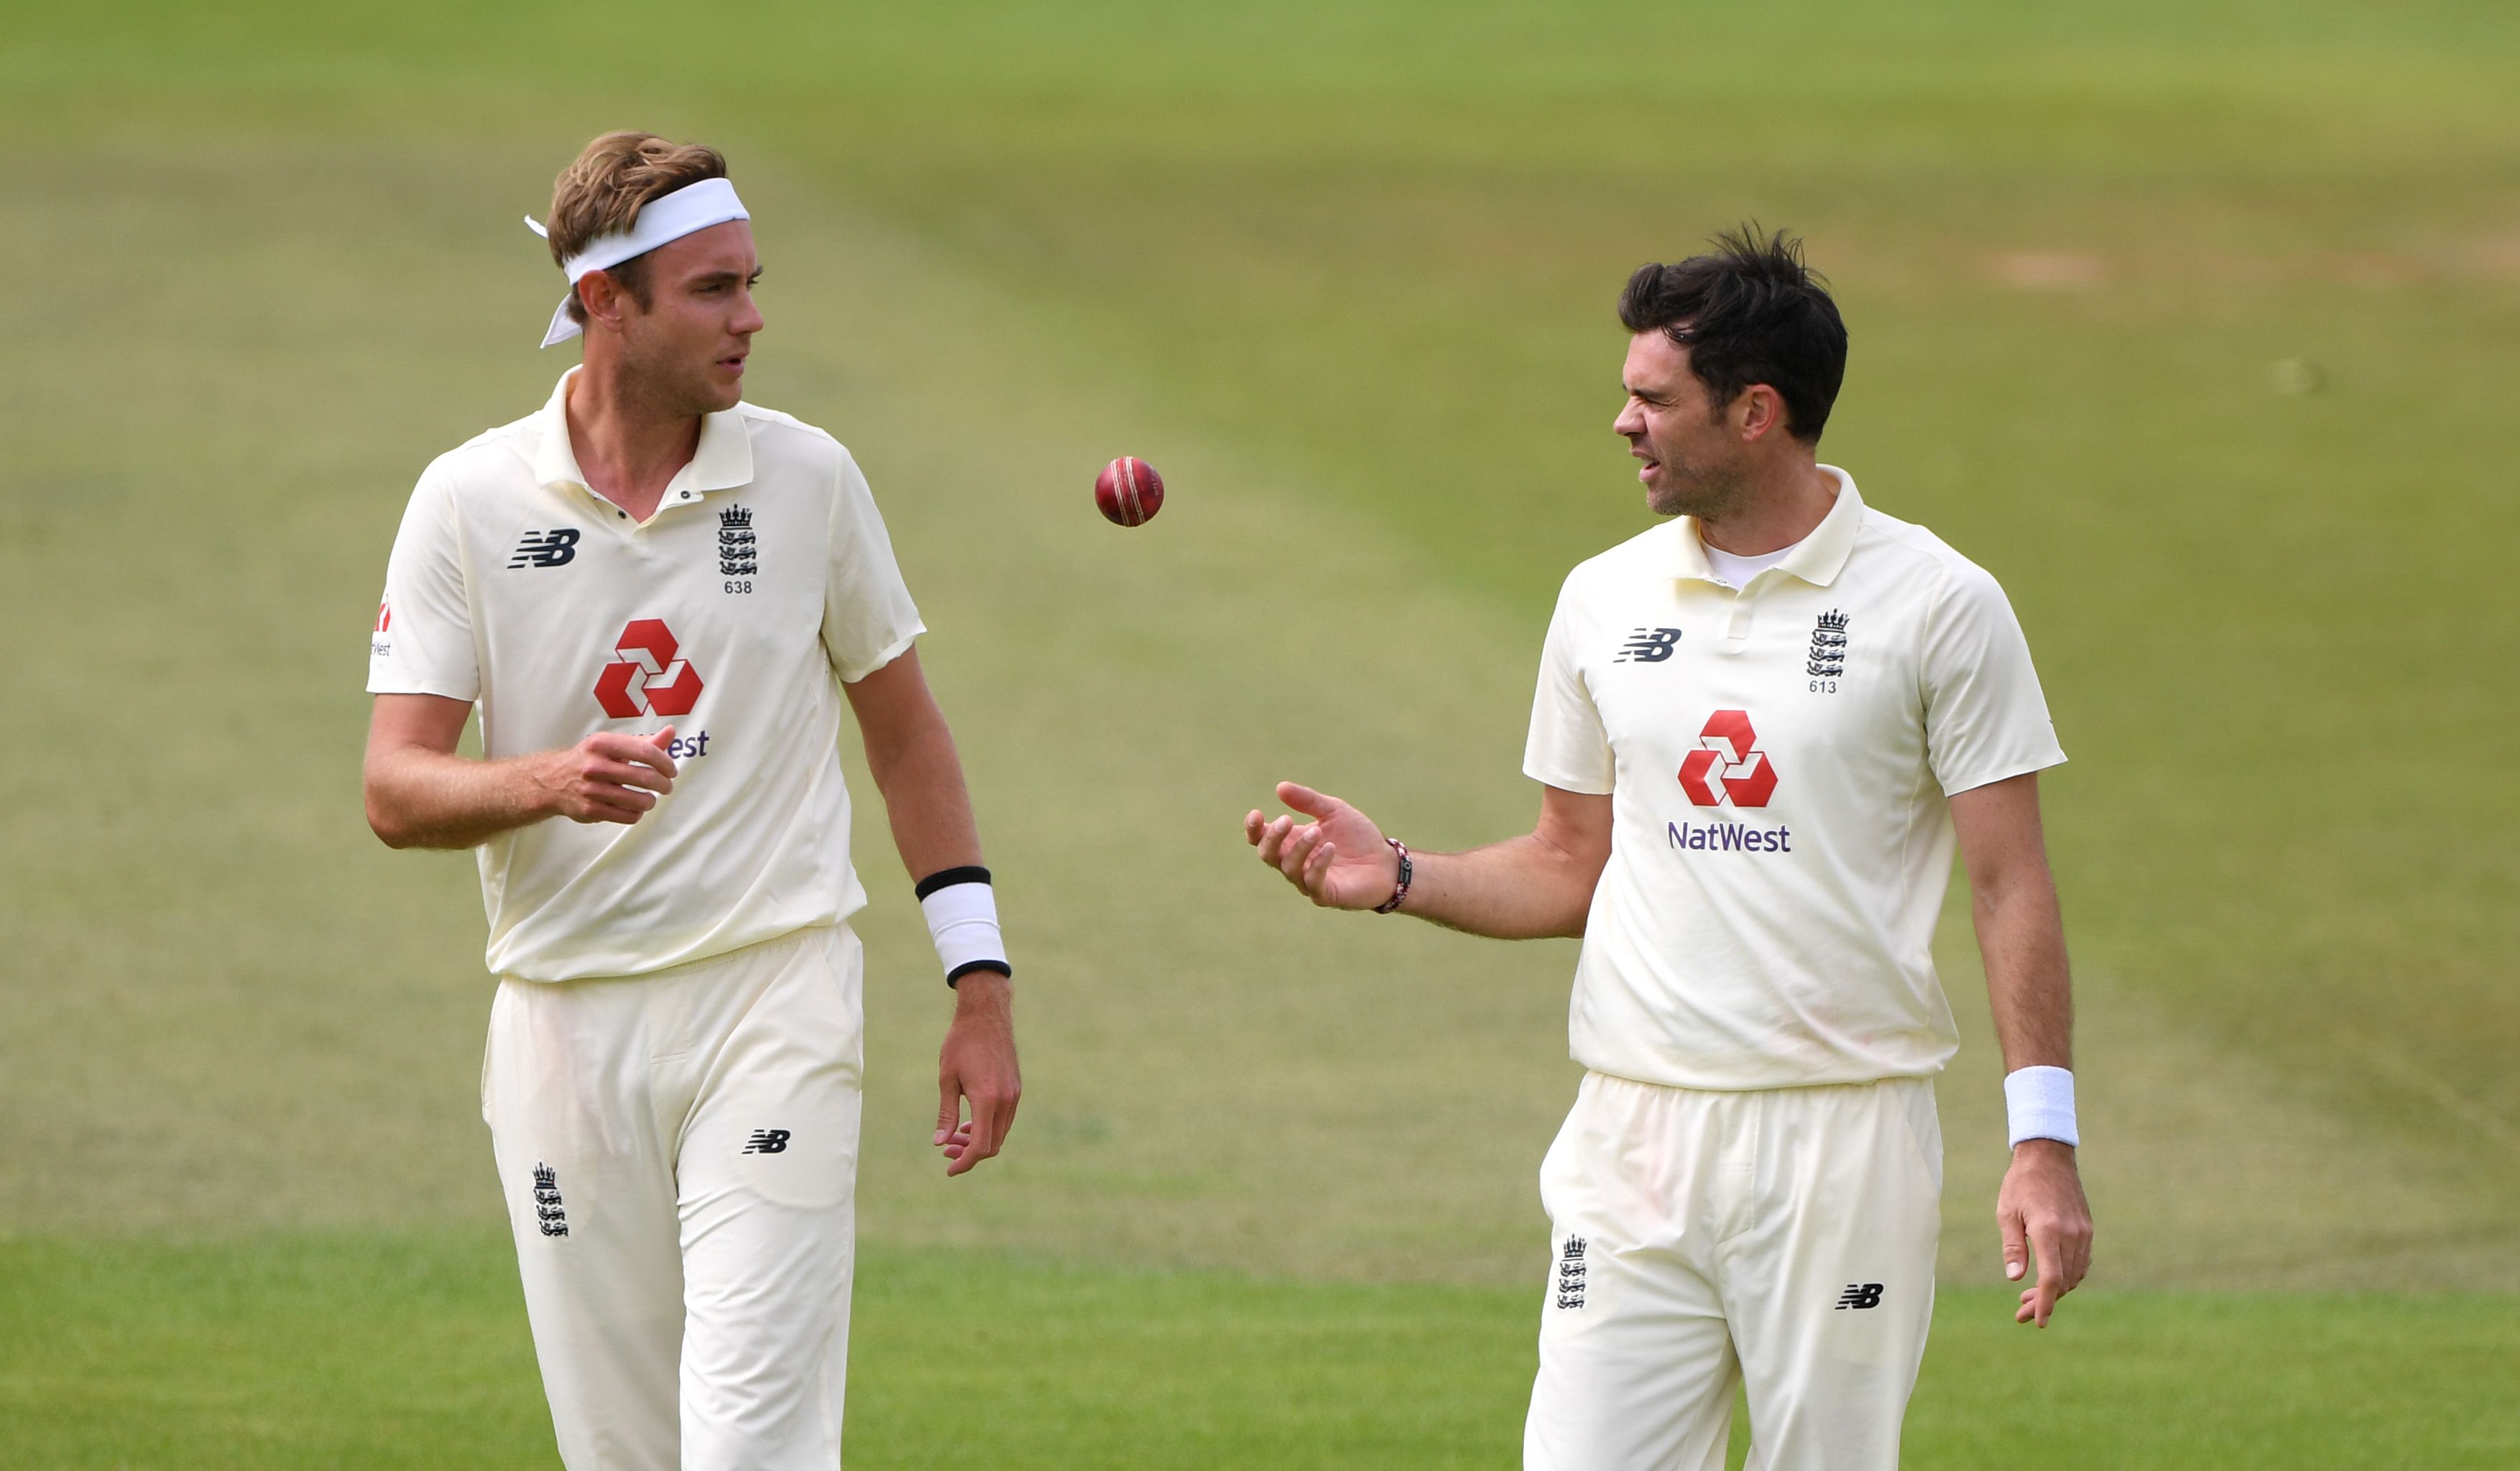 Injury blow for England with James Anderson ruled out of first Ashes Test